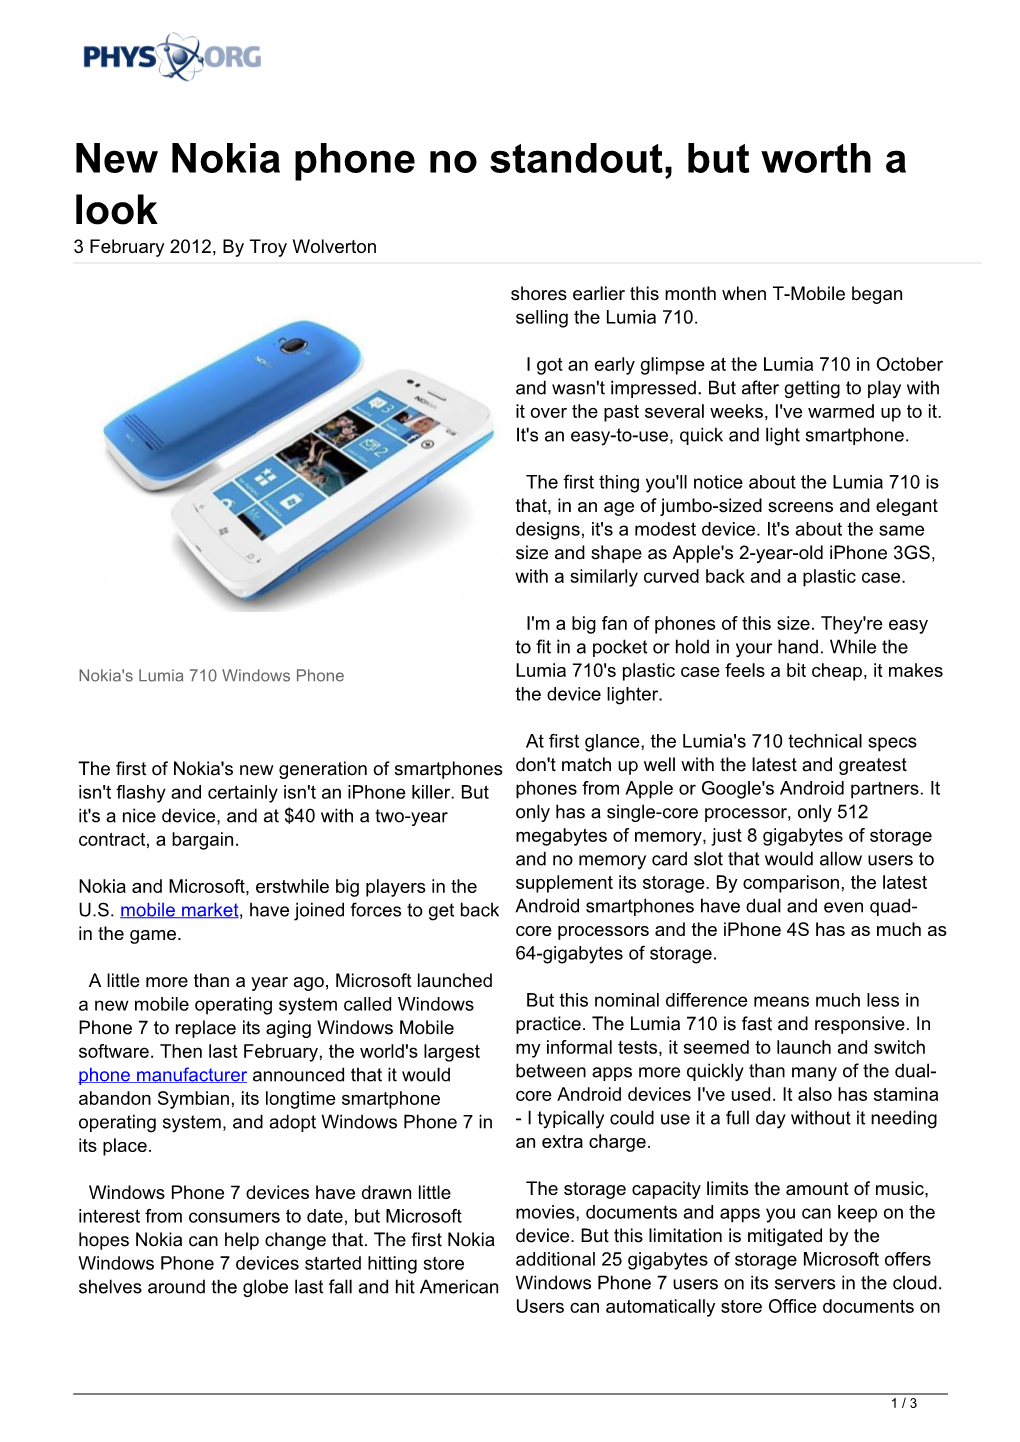 New Nokia Phone No Standout, but Worth a Look 3 February 2012, by Troy Wolverton